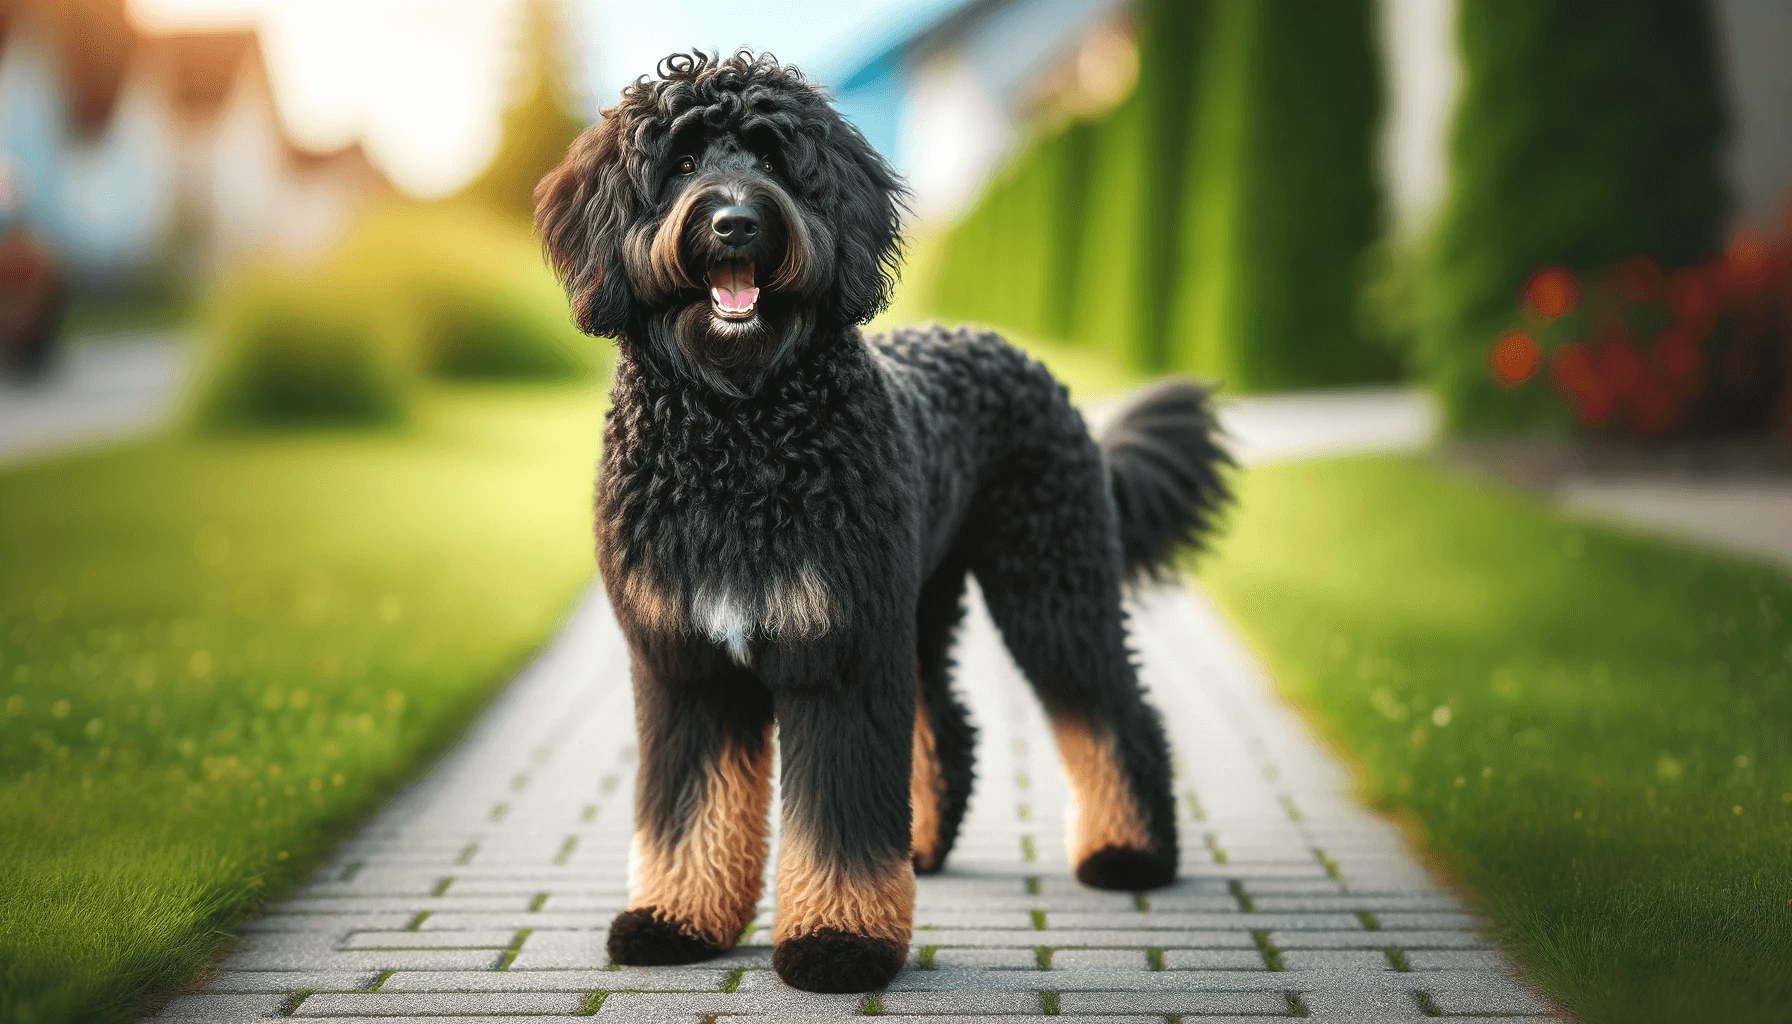 Black Aussiedoodle with a curly black coat standing on a sidewalk with a blurred grassy background, looking alert and happy